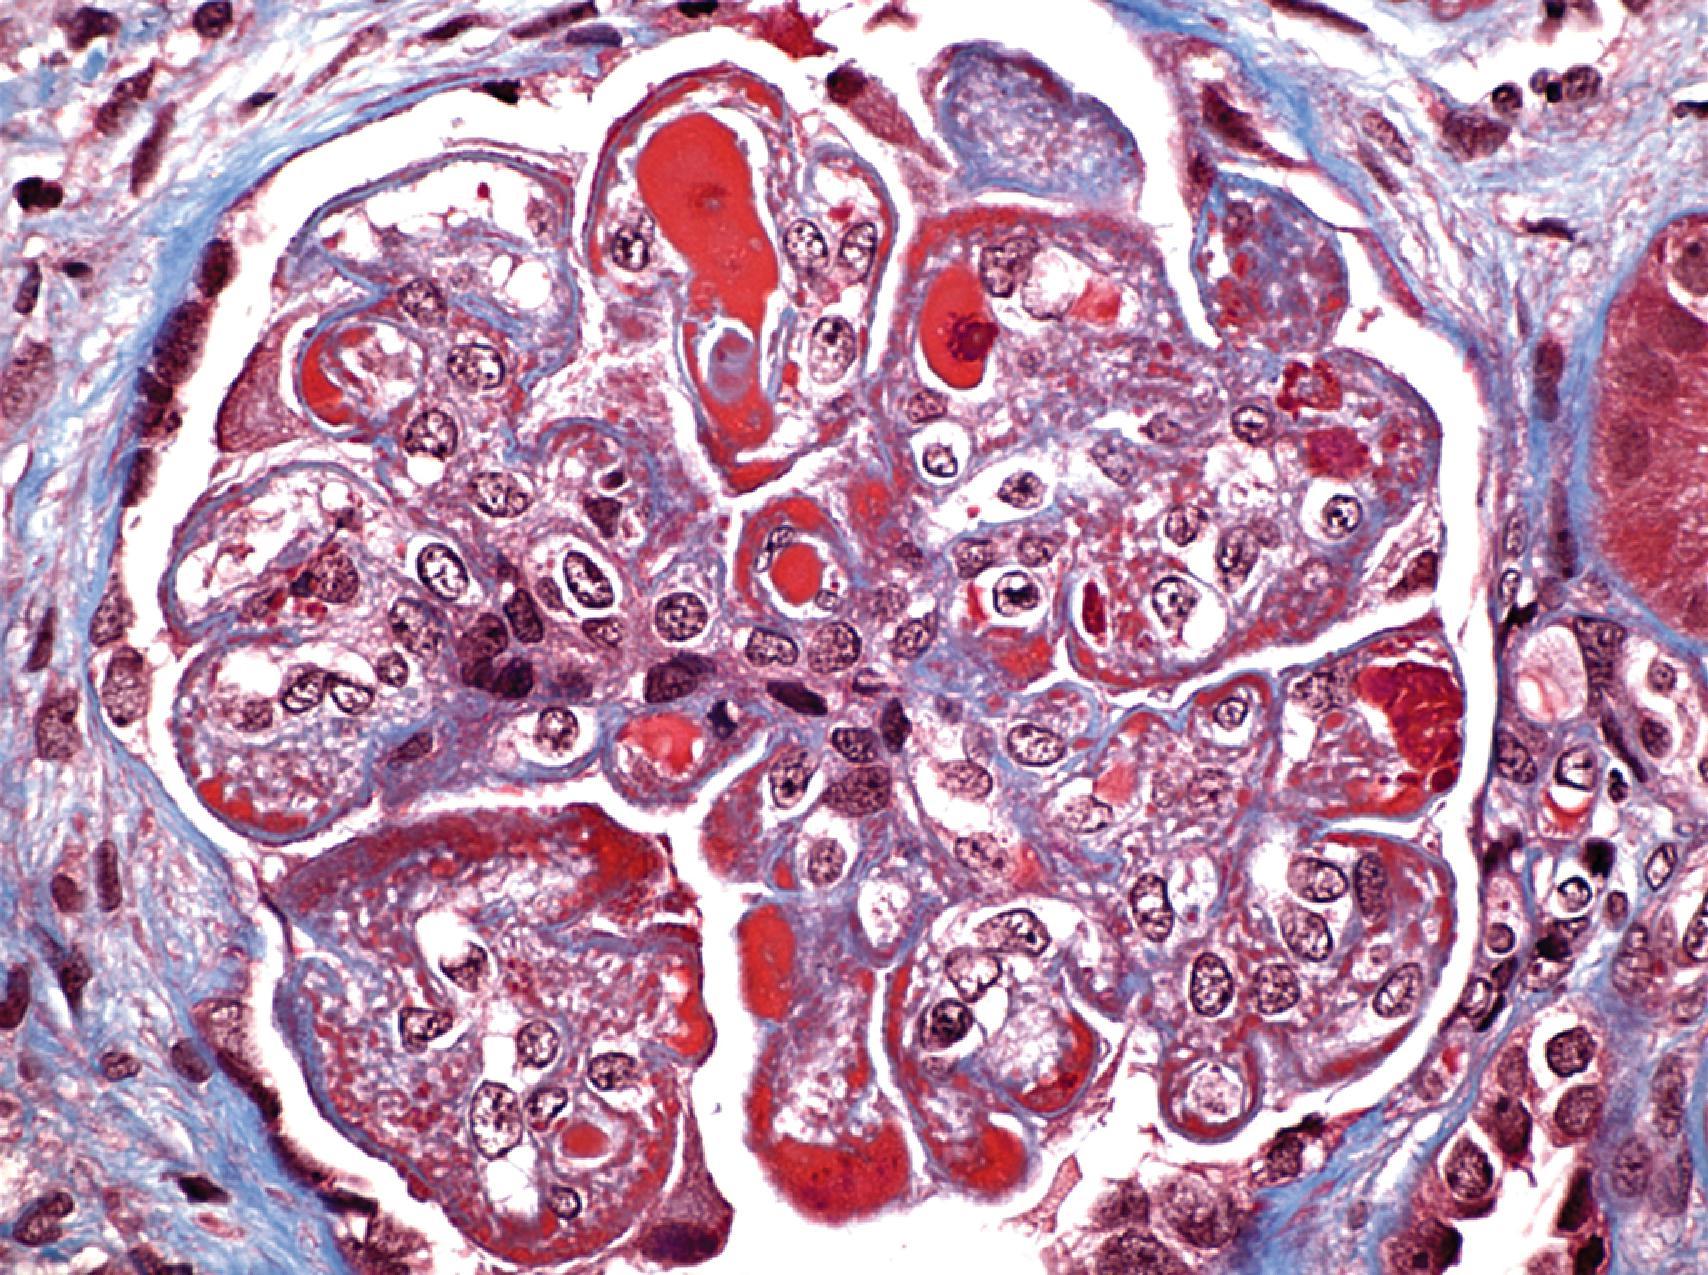 Fig. 25.4, Class IV lupus nephritis. Trichrome stain is useful to highlight fuchsinophilic (red) deposits against the blue-staining glomerular basement membrane and mesangial matrix. In this glomerulus, many subendothelial “wire loops” and intracapillary “hyaline thrombi” are seen (Masson trichrome, ×600).